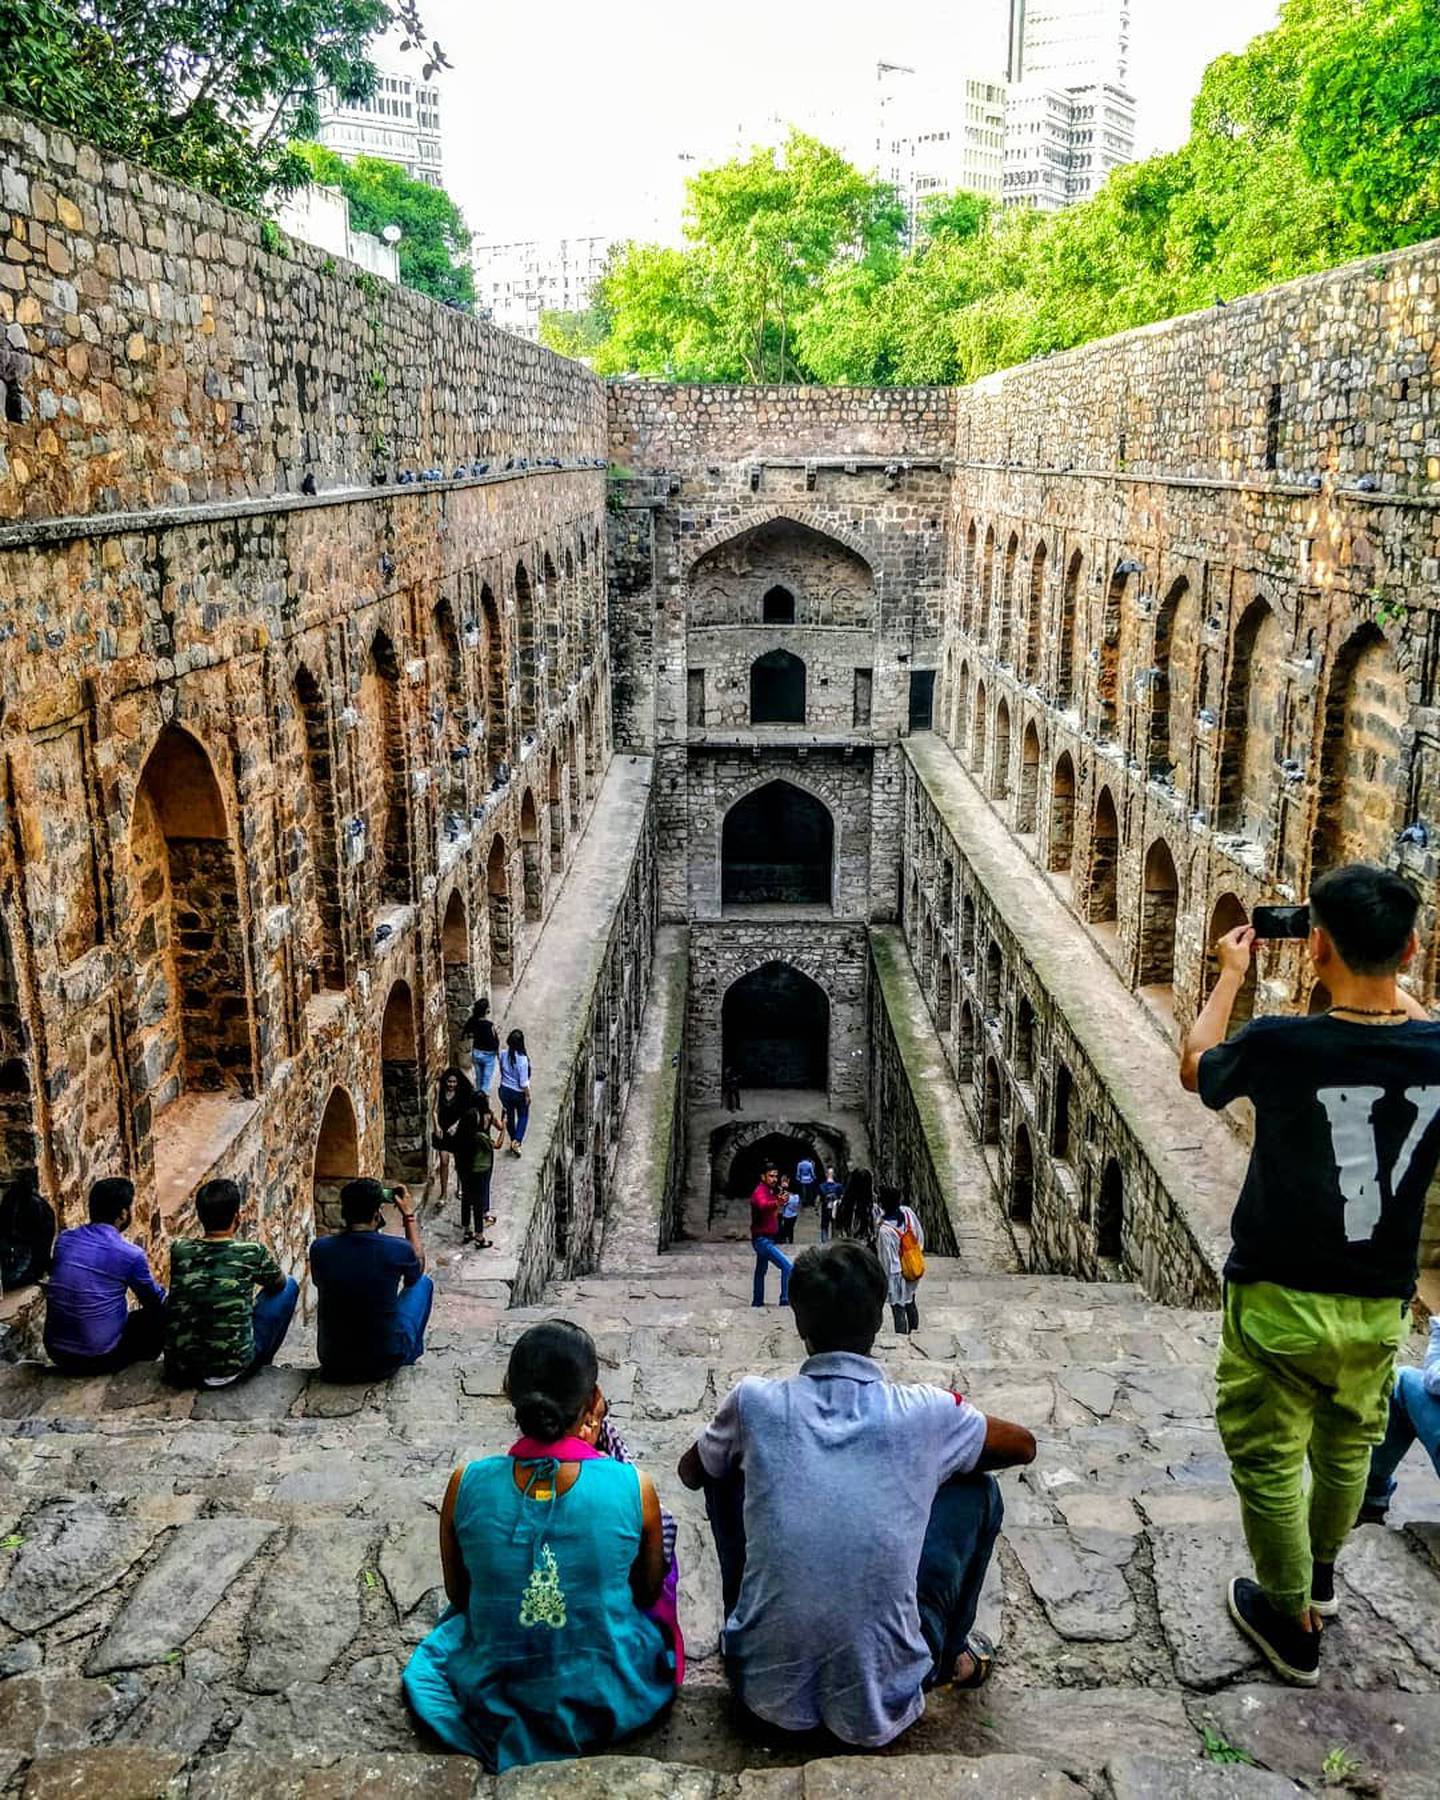 Agrasen ki Baoli, designated a protected monument by the Archaeological Survey of India, in the heart of New Delhi. Photo: Kalpana Sunder